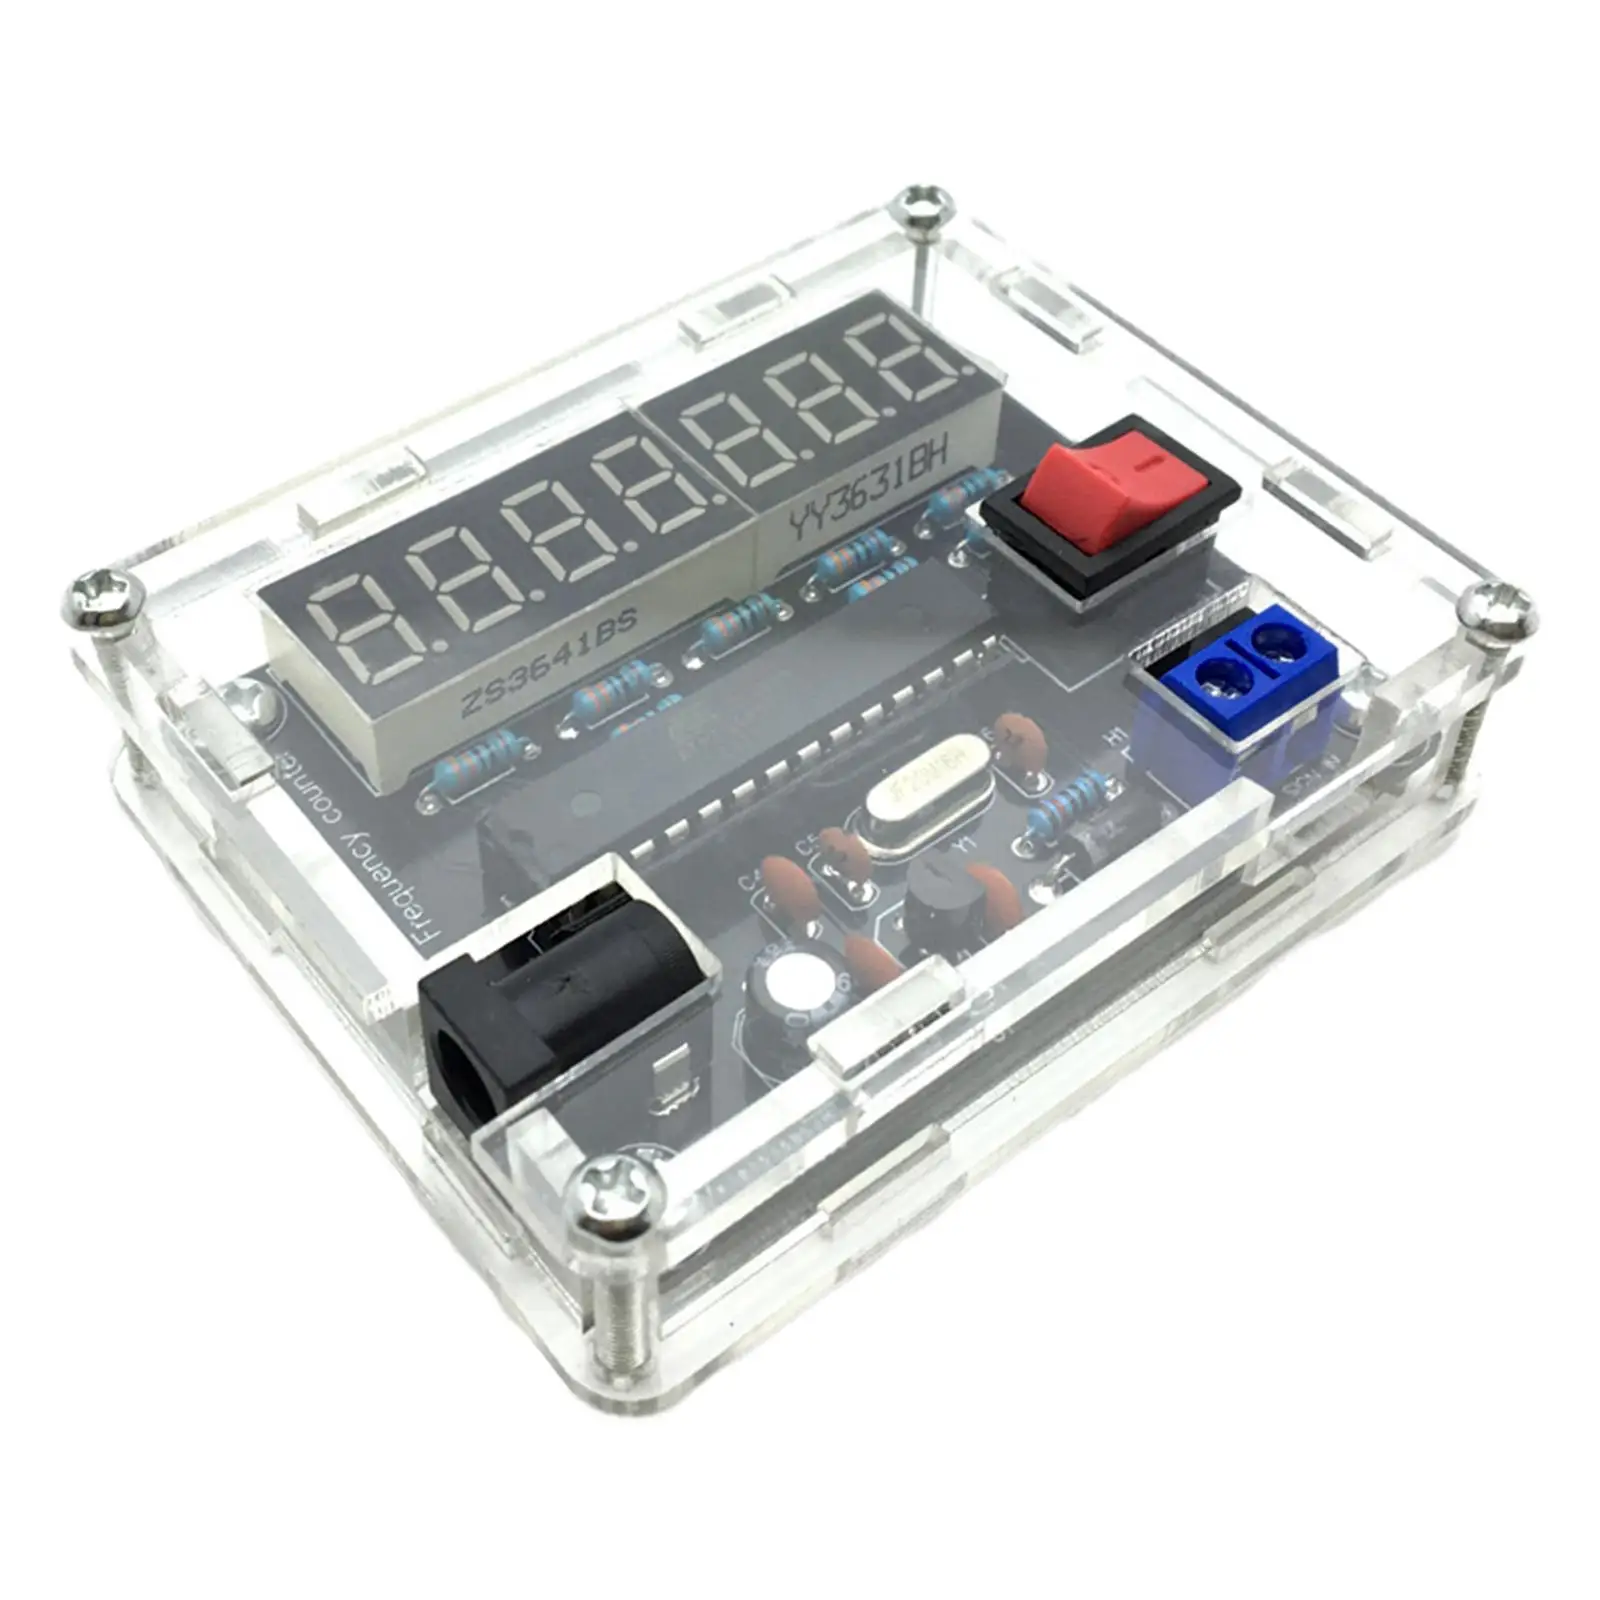 5-12V DIY Frequency Tester Counter Meter Oscillator Tester 10MHz with Transparent Case